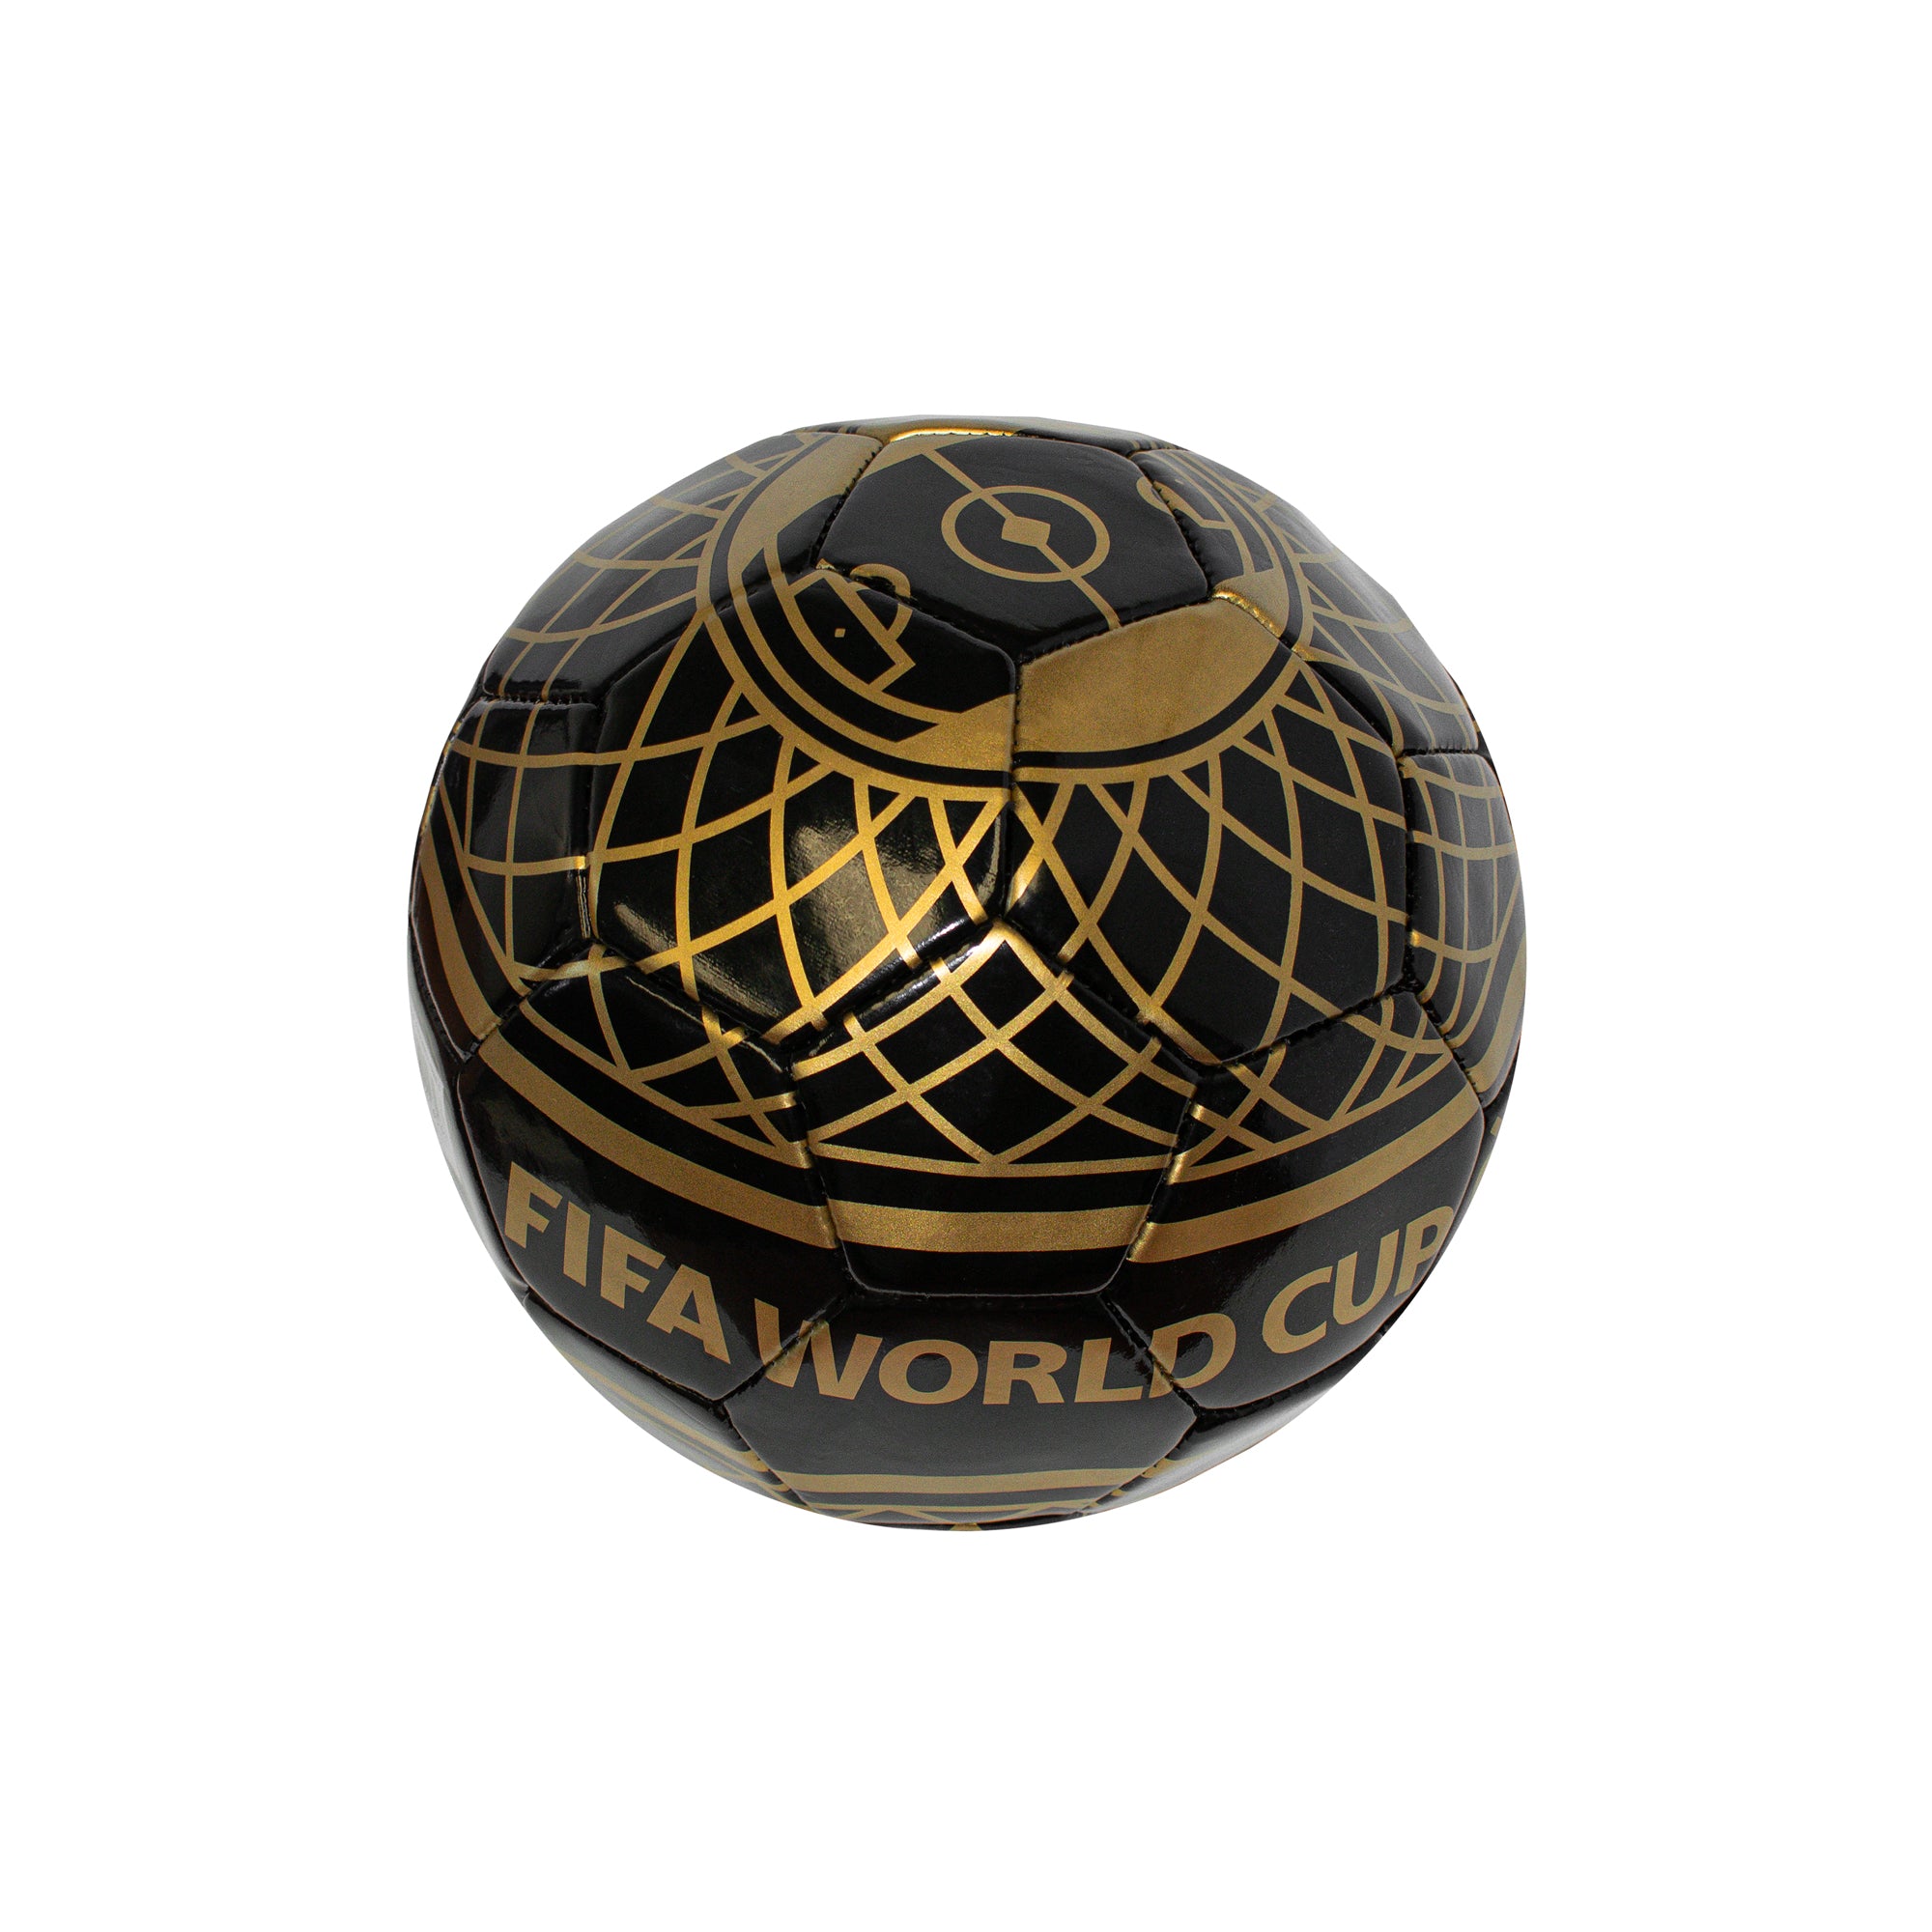 Buy FIFA World Cup 2022 Black and Gold Trophy Ball Online!